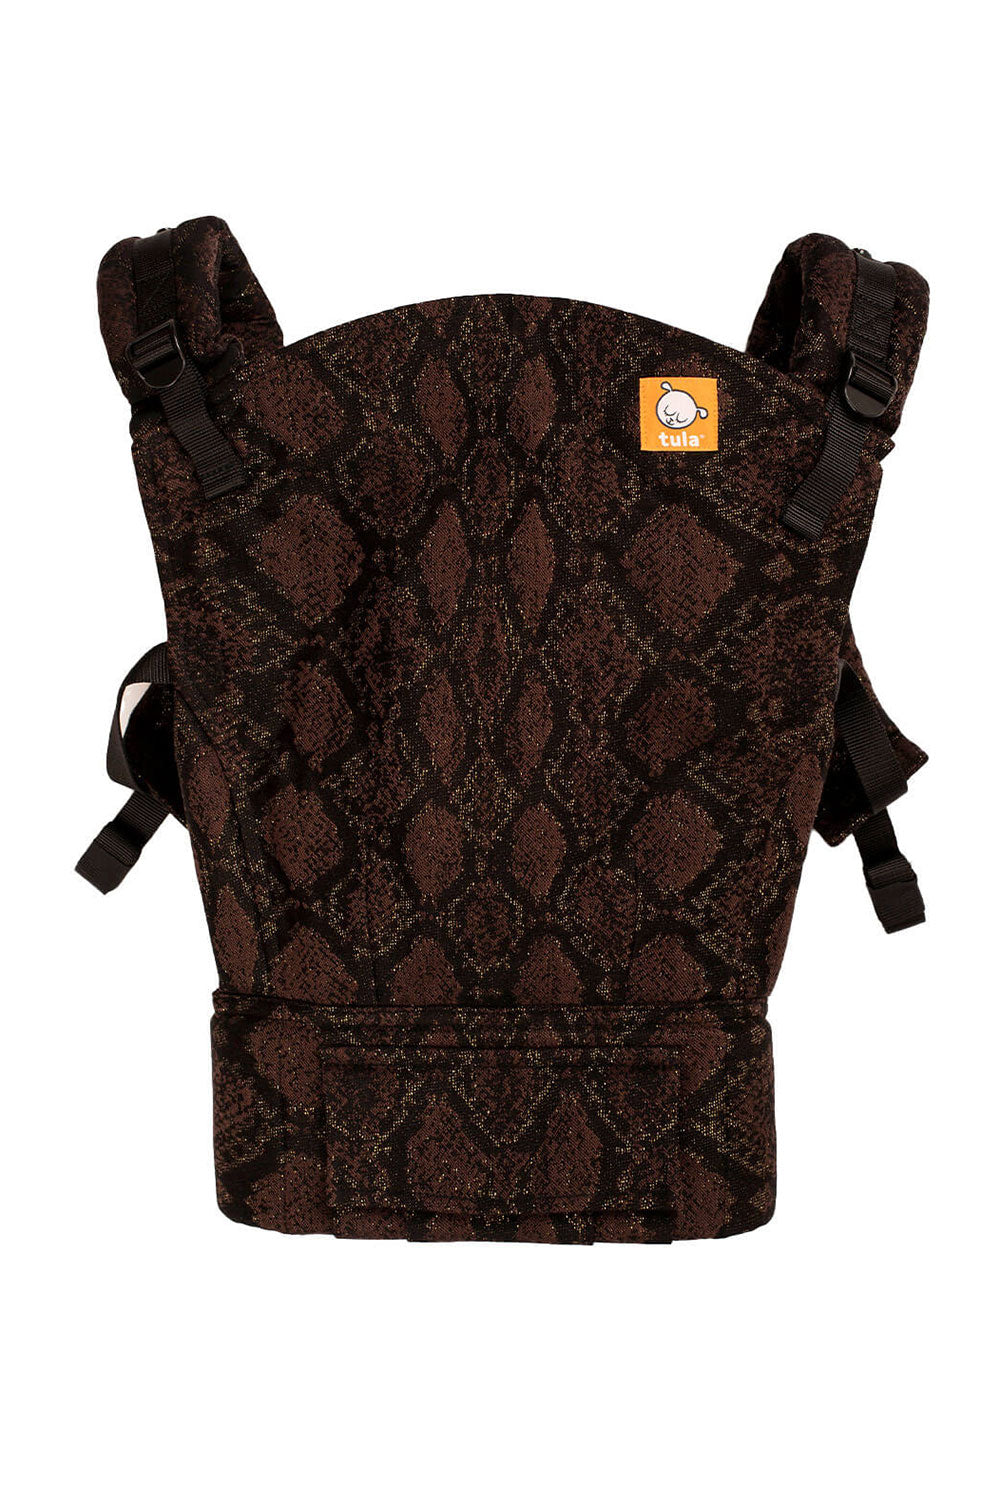 Wild Soul Blink - Signature Woven Standard Baby Carrier